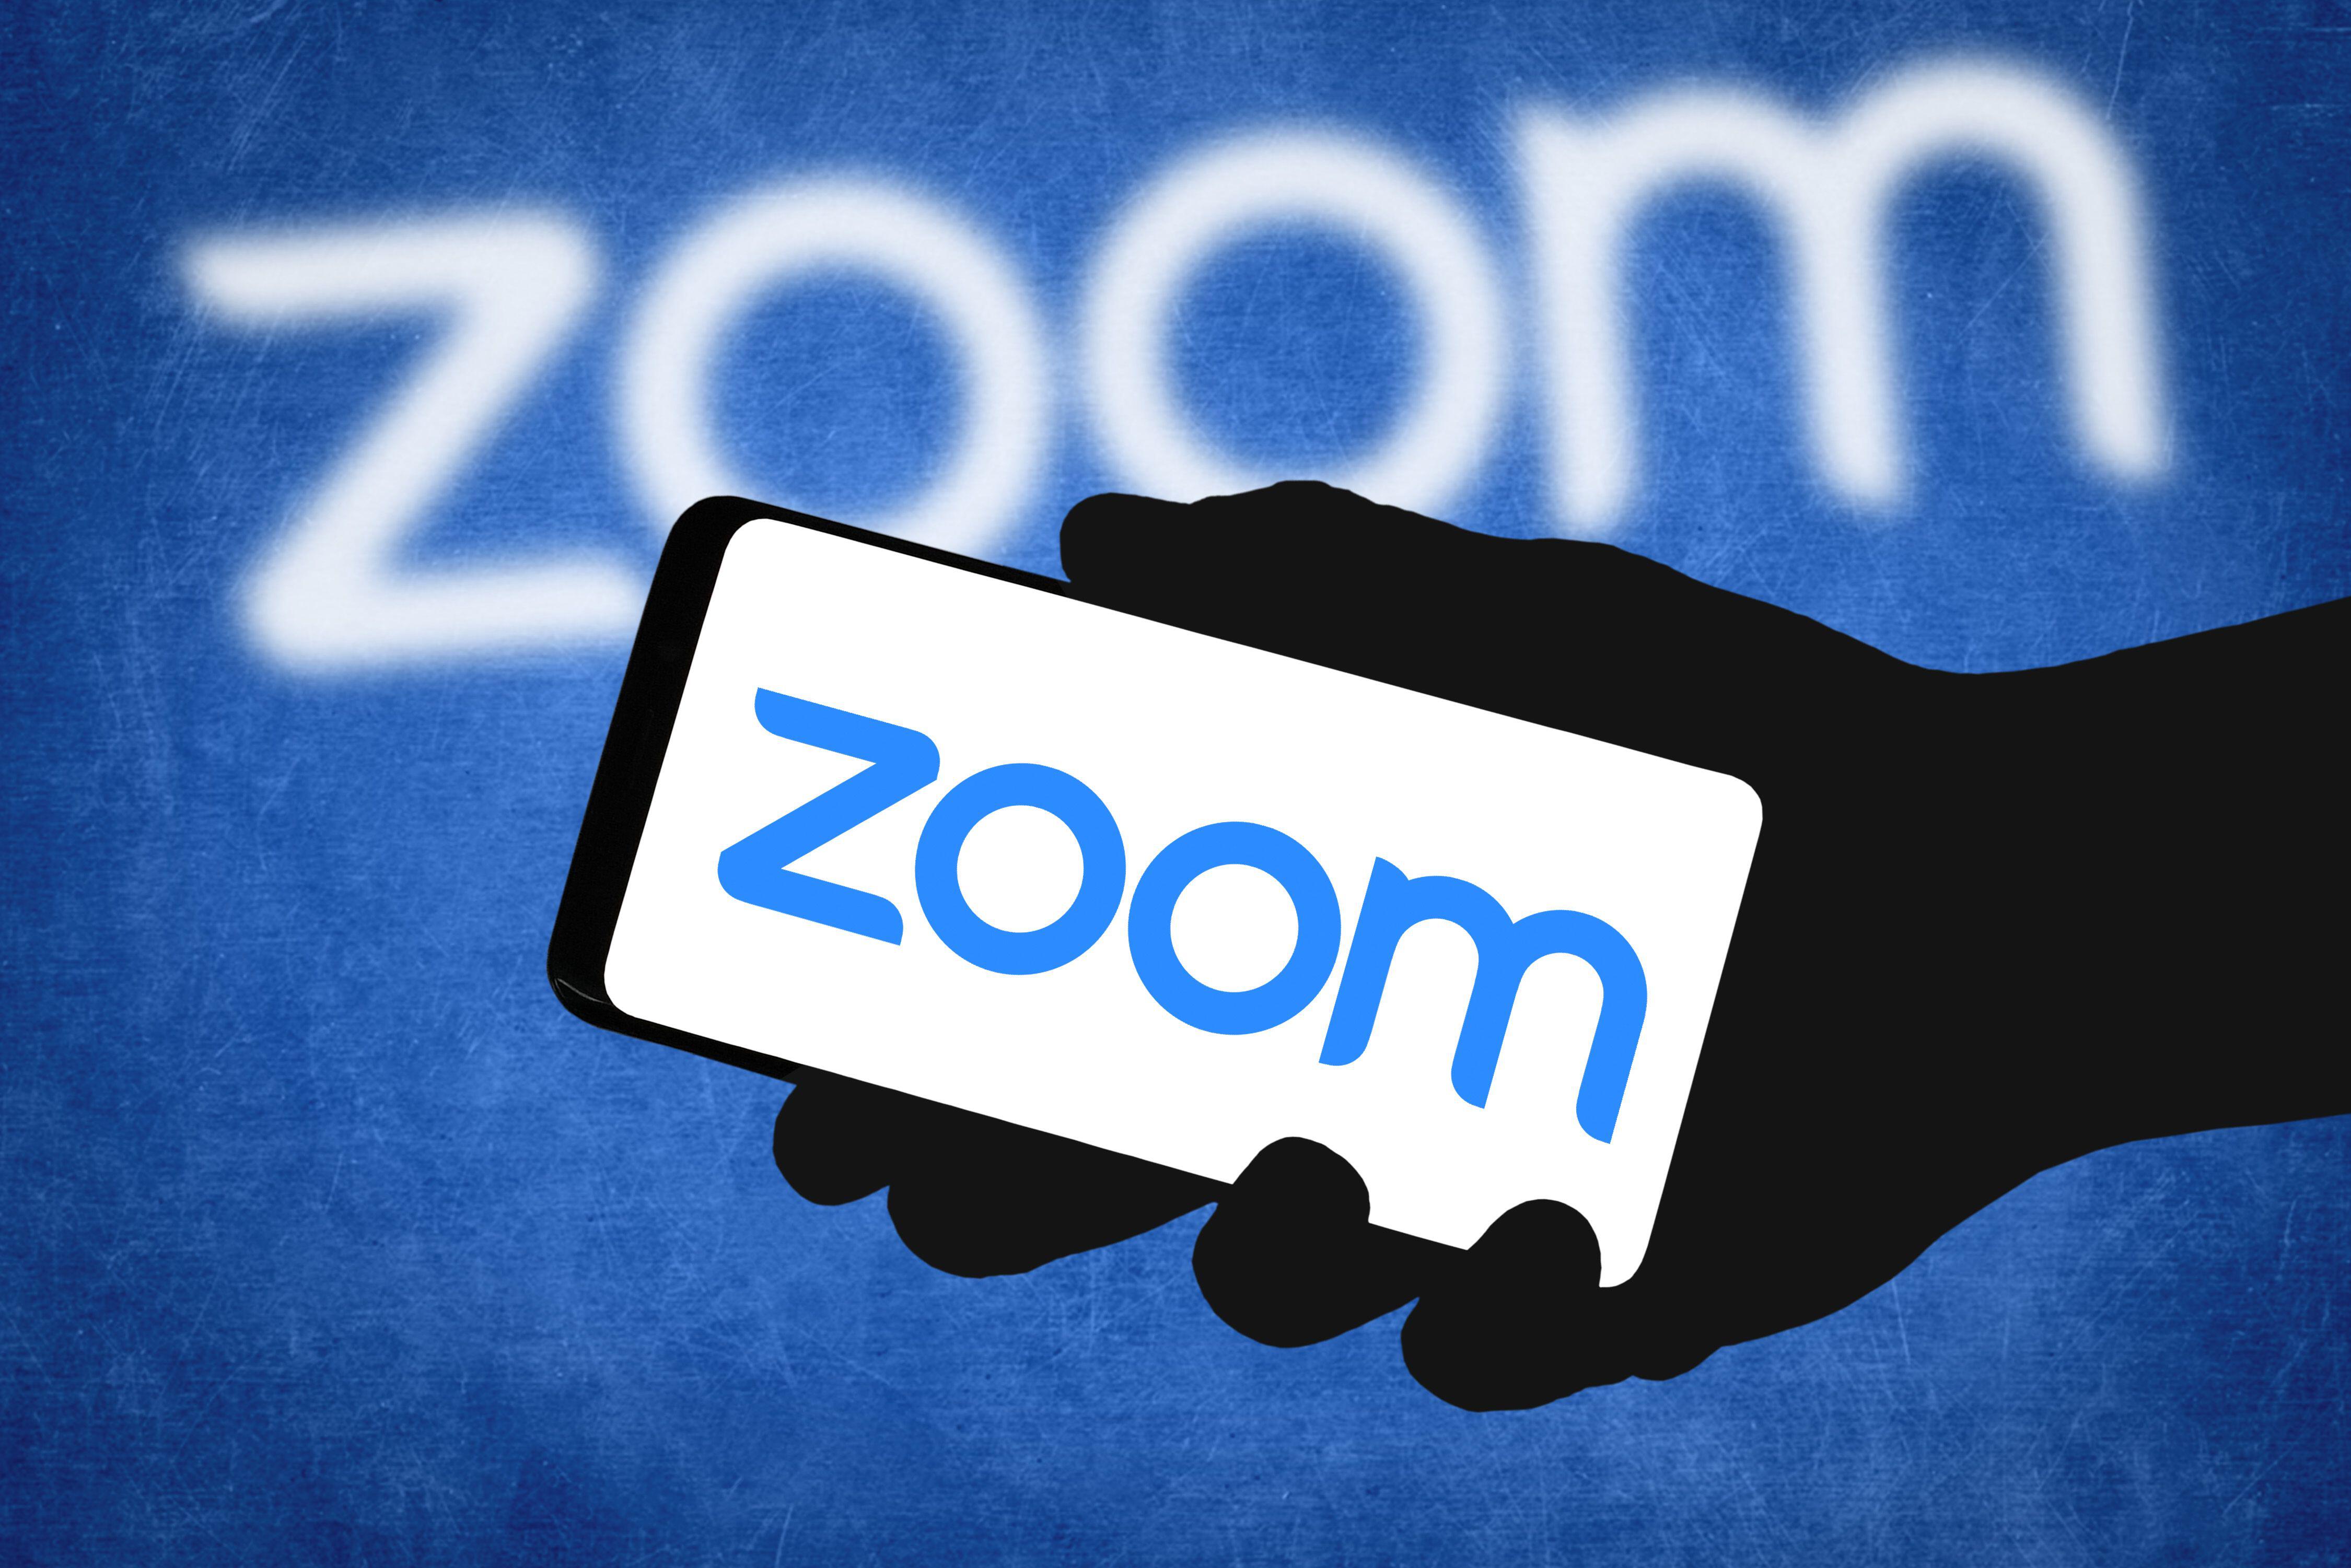 hand-holding-zoom-logo-in-front-of-zoom-screen.jpg